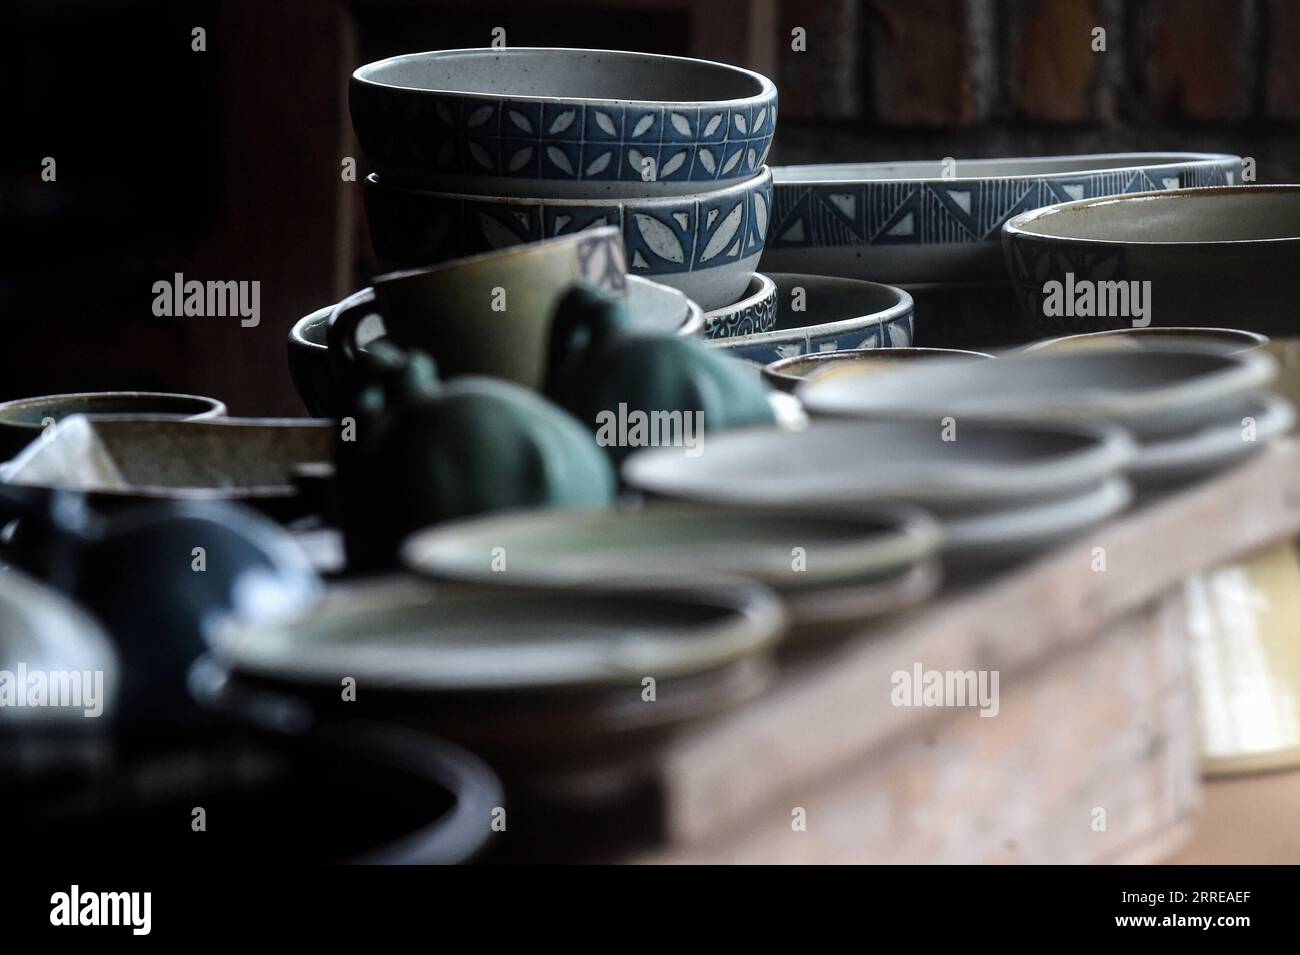 220214 -- WEST JAVA, Feb. 14, 2022 -- Potteries are displayed at a workshop in Depok, West Java, Indonesia, Feb. 14, 2022.  INDONESIA-WEST JAVA-POTTERY MAKING AgungxKuncahyaxB. PUBLICATIONxNOTxINxCHN Stock Photo